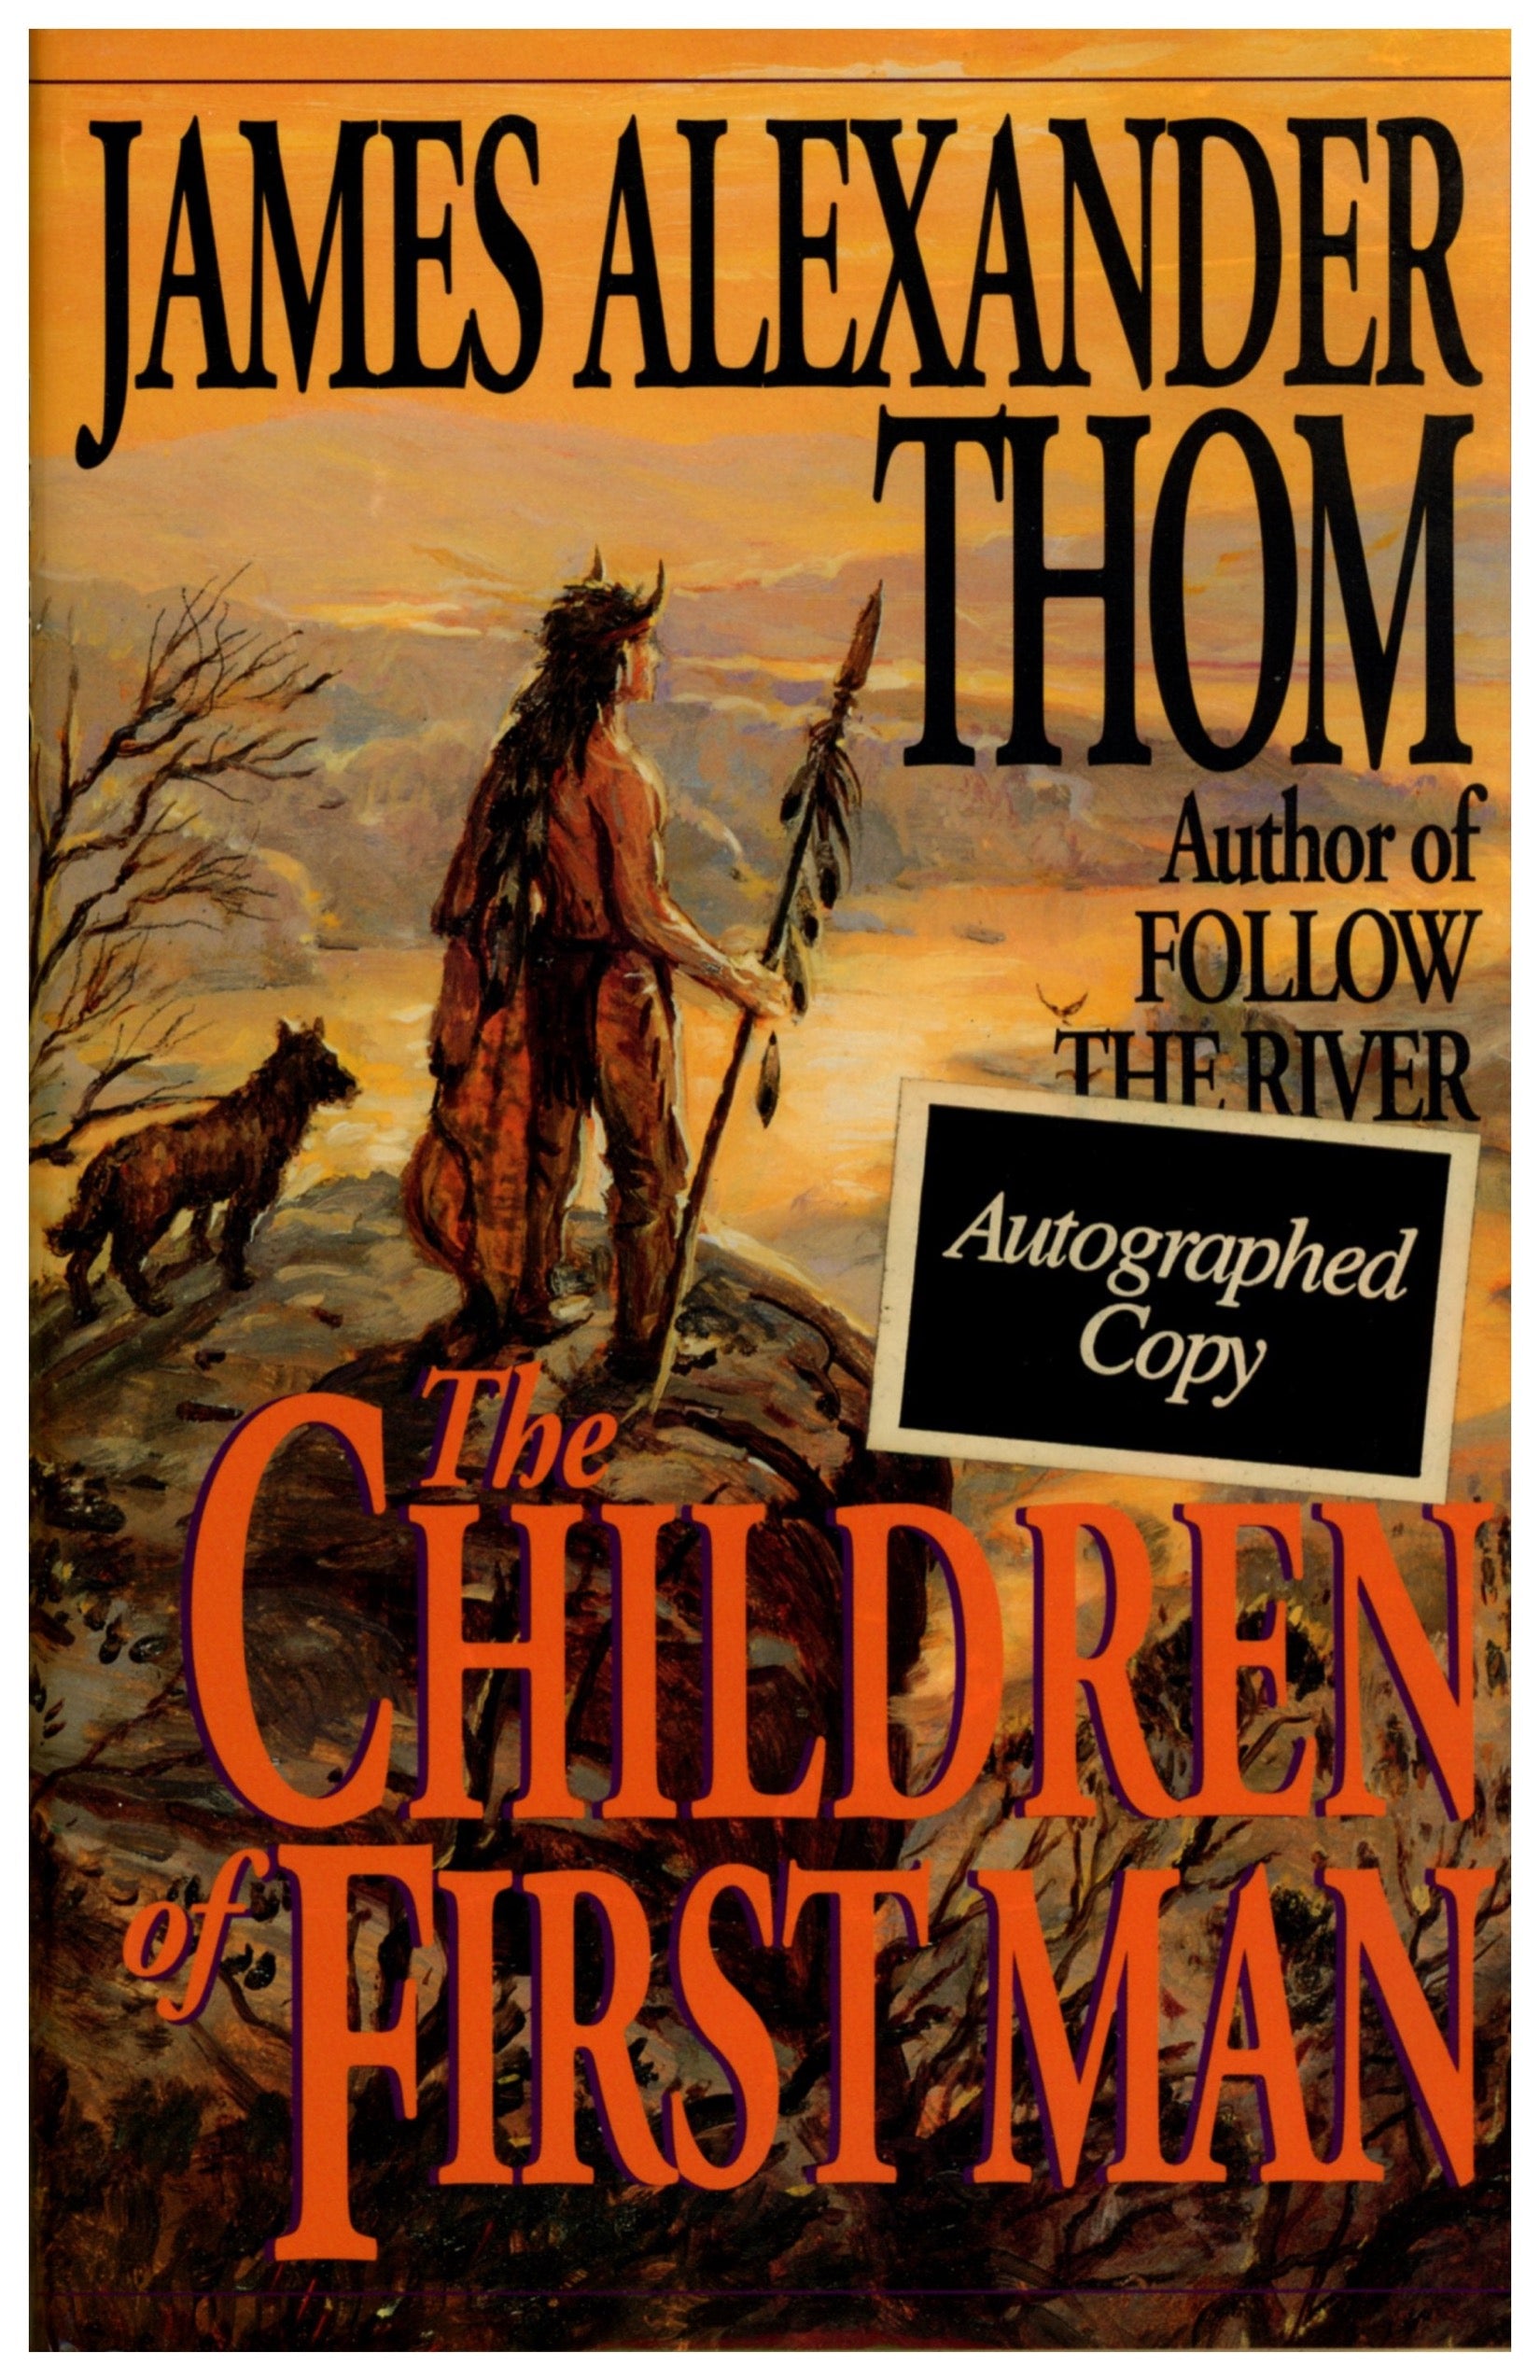 THE CHILDREN OF THE FIRST MAN by James Alexander Thom Published by Ballentine Books ©1994 Autographed First Edition